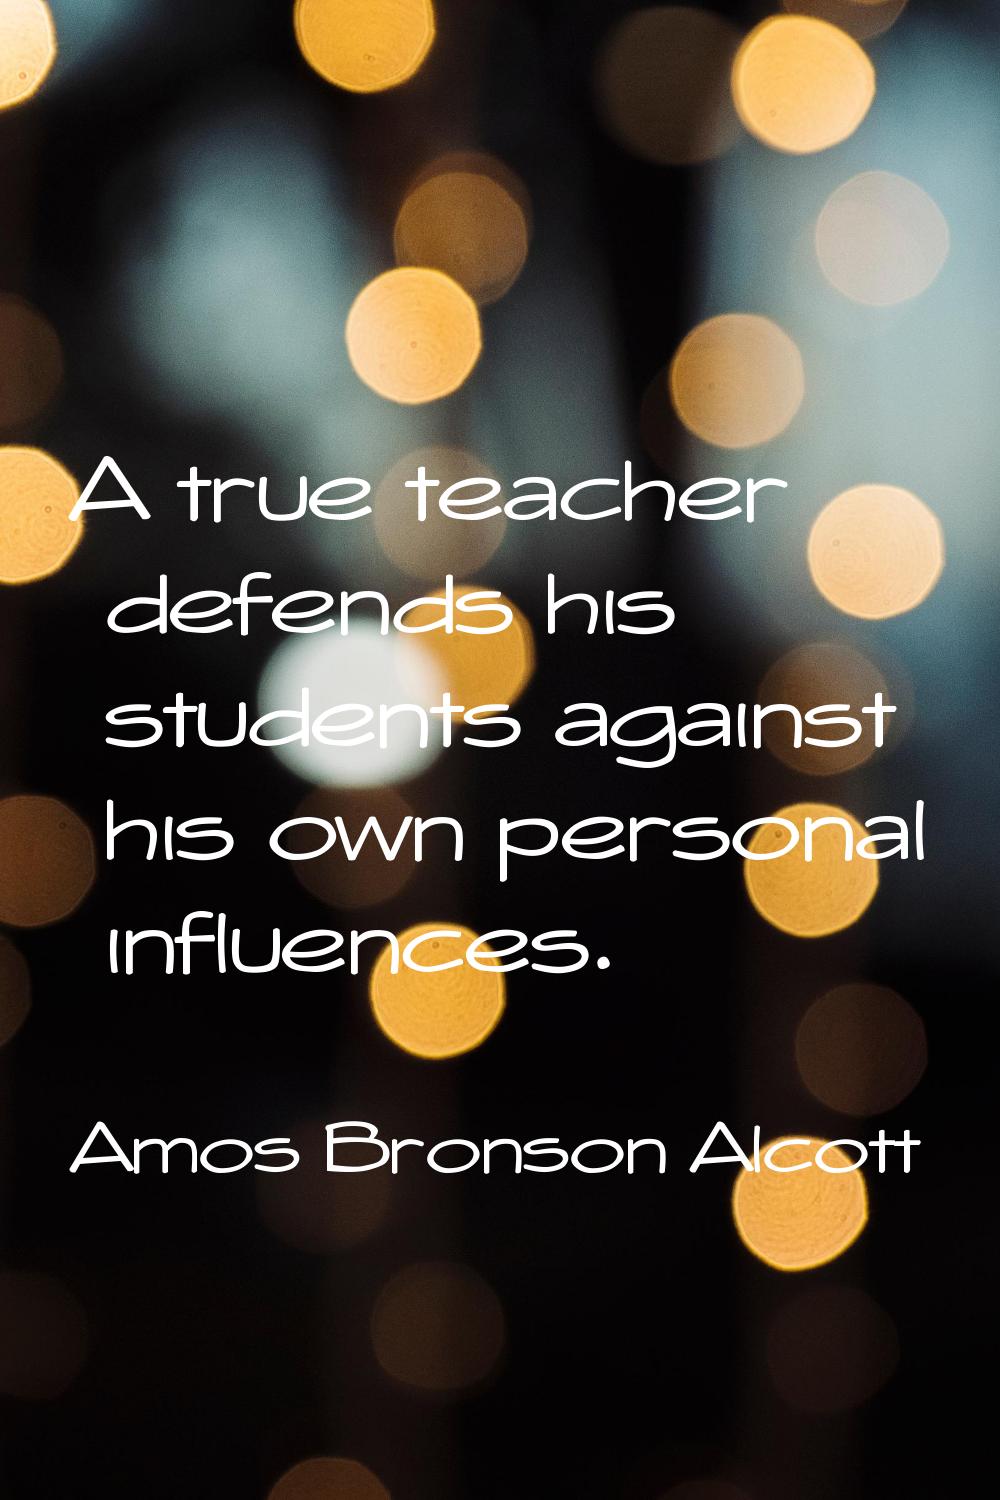 A true teacher defends his students against his own personal influences.